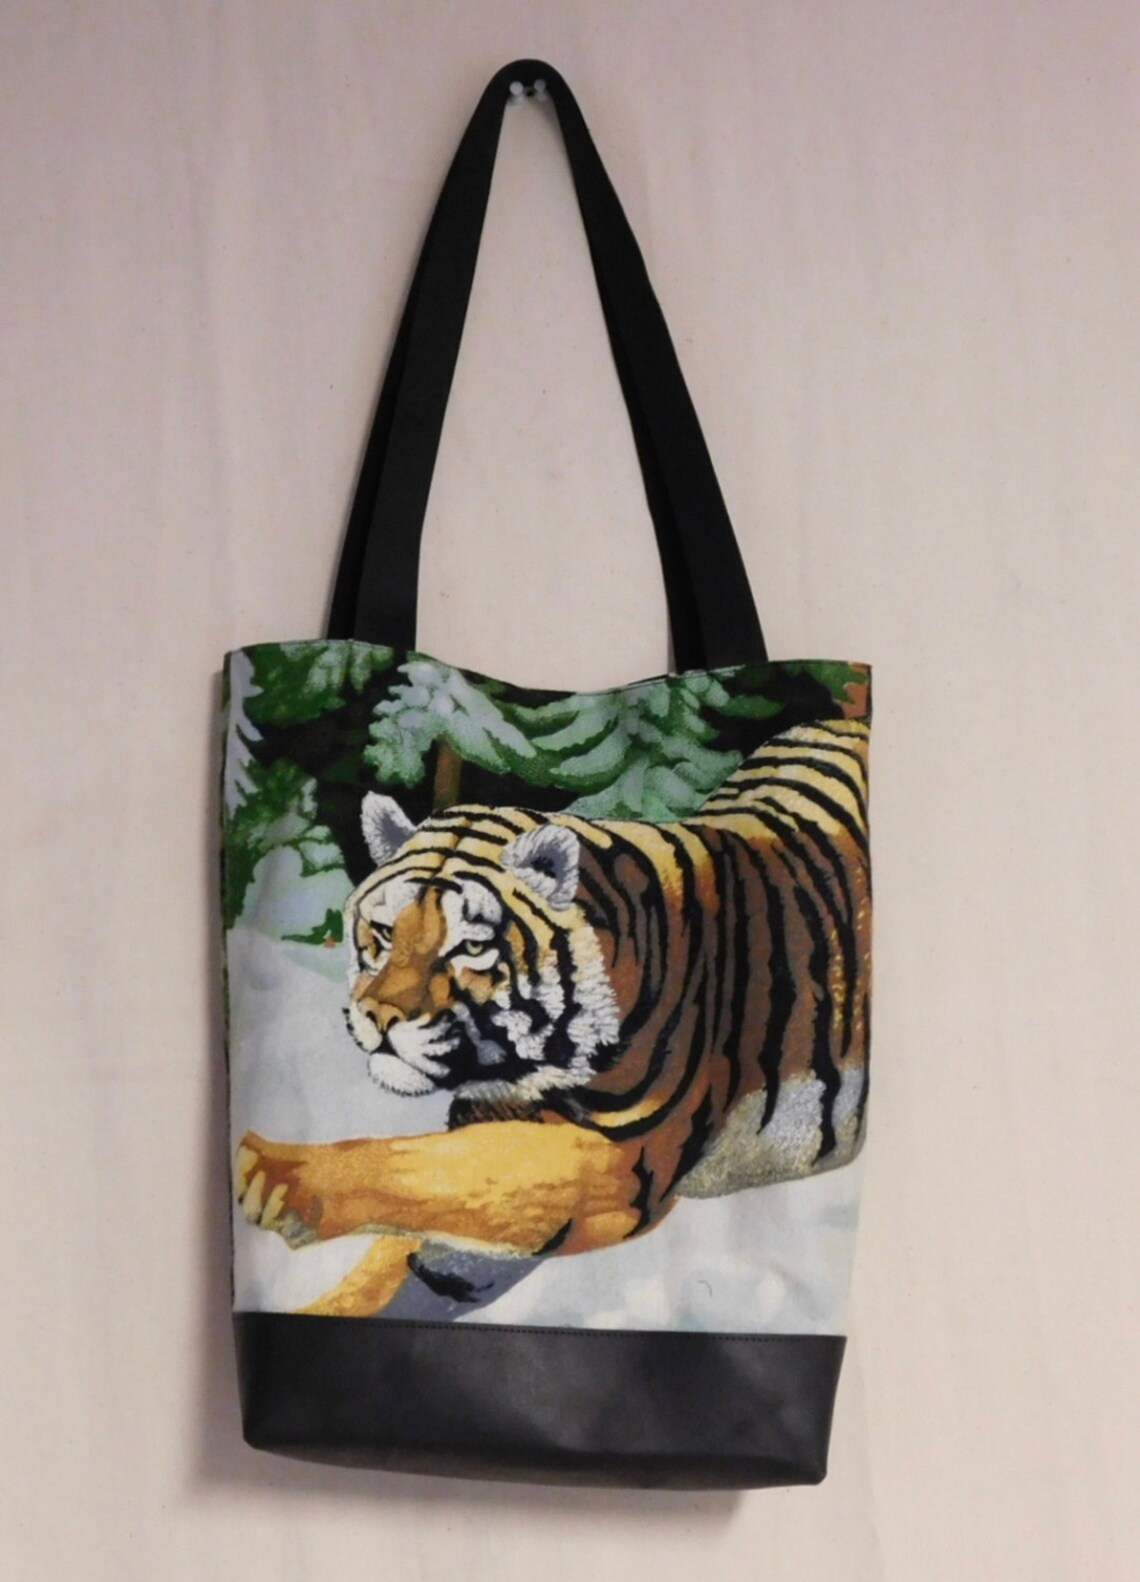 Tiger Tote Baghandmade From Velour and Black Leather - Etsy